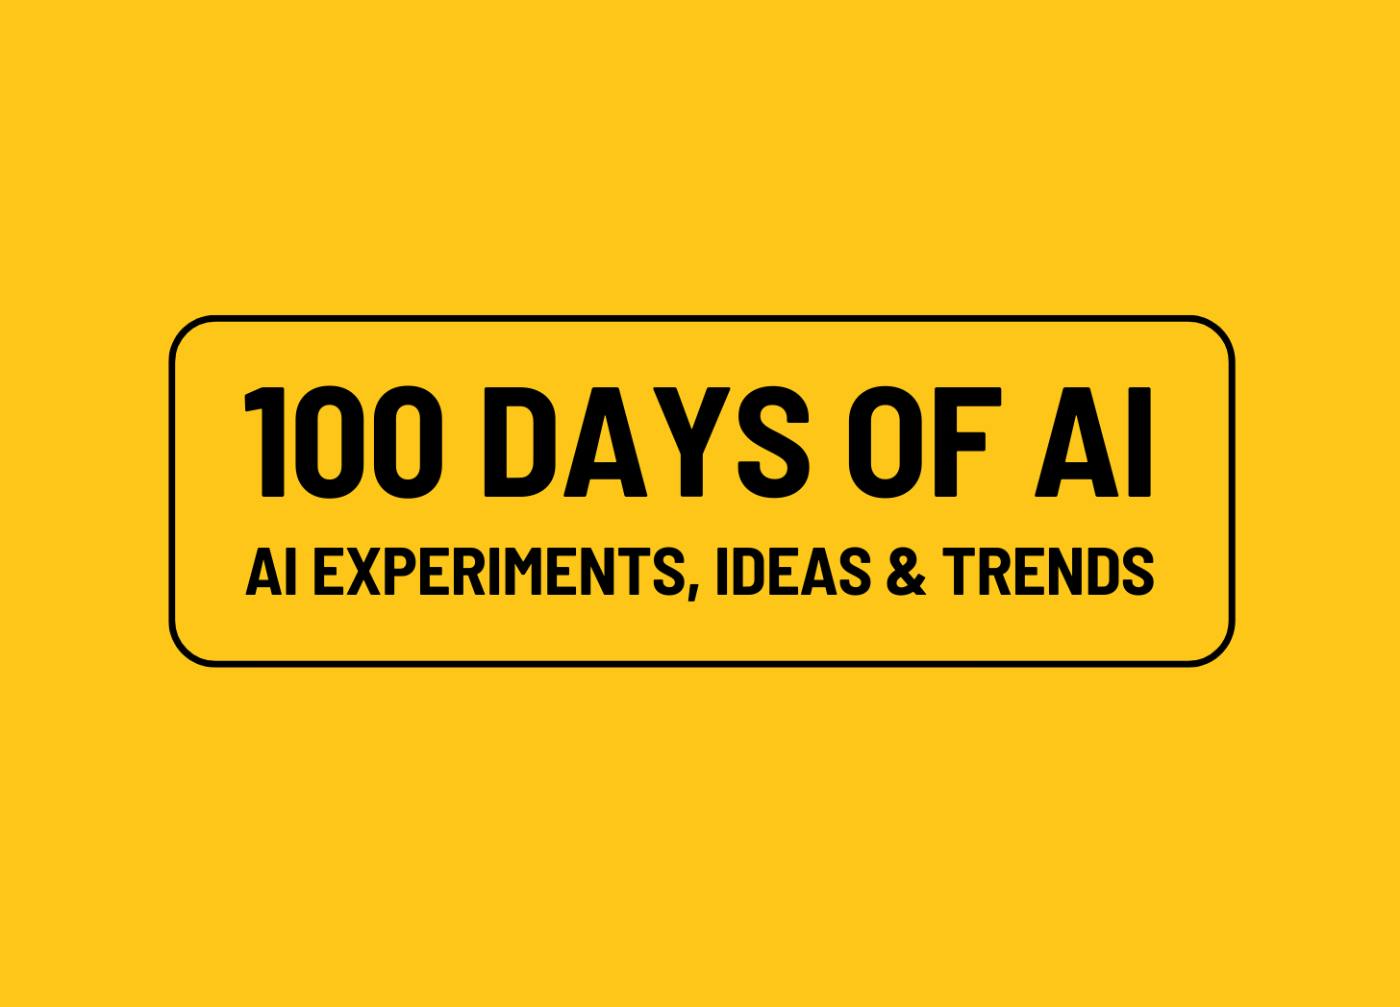 100 Days of AI, Day 12: How to Quickly Demo Your Gen AI Experiments to Get Feedback